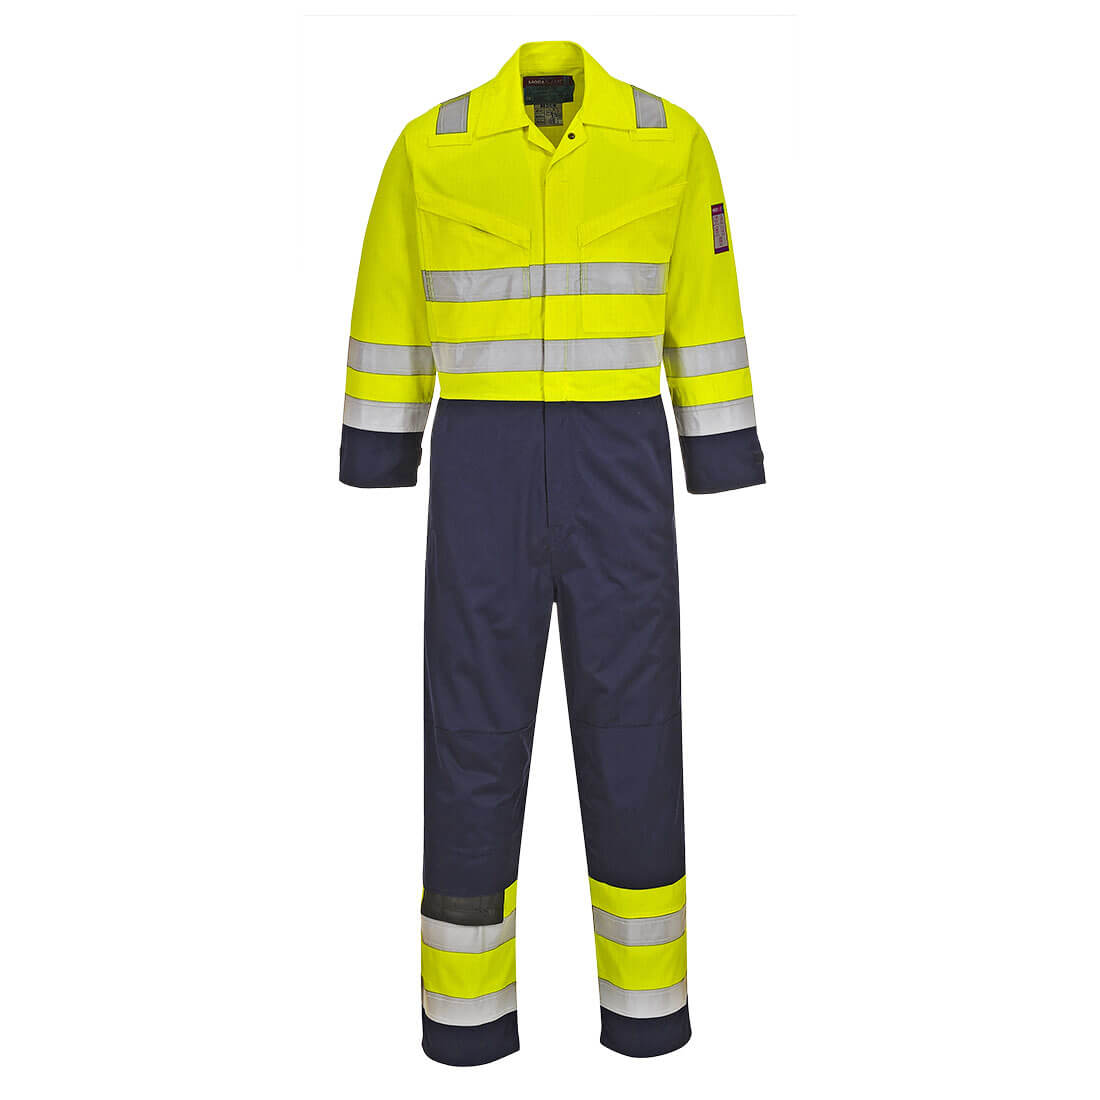 Image of Modaflame Flame Resistant Hi Vis Overall Yellow / Navy S 32"